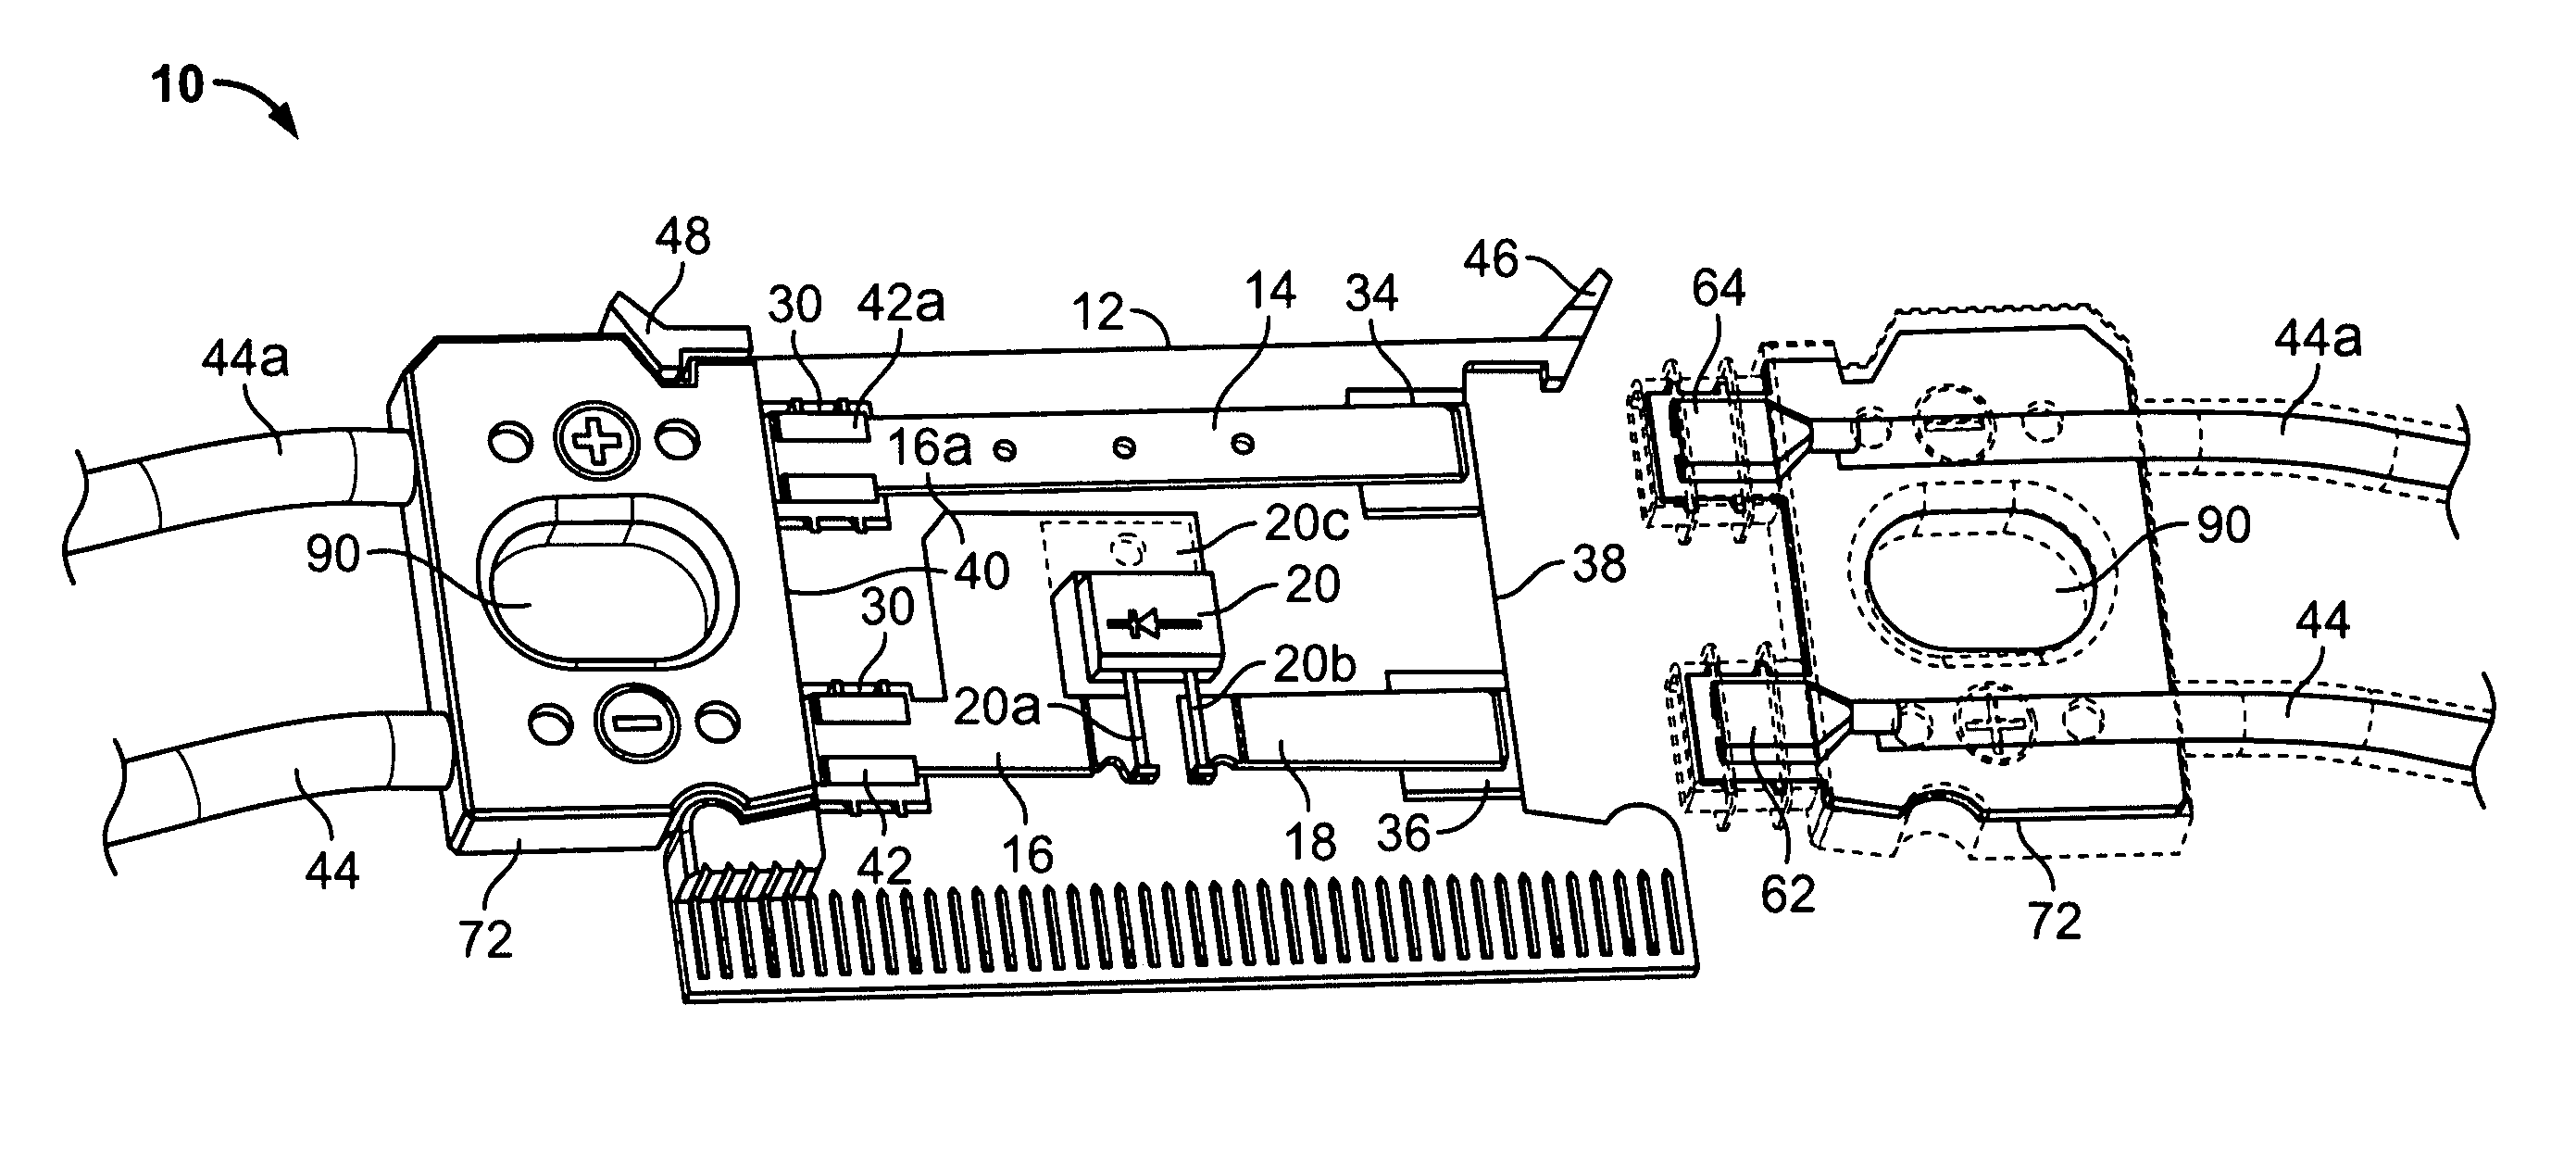 Connector system for solar cell roofing tiles